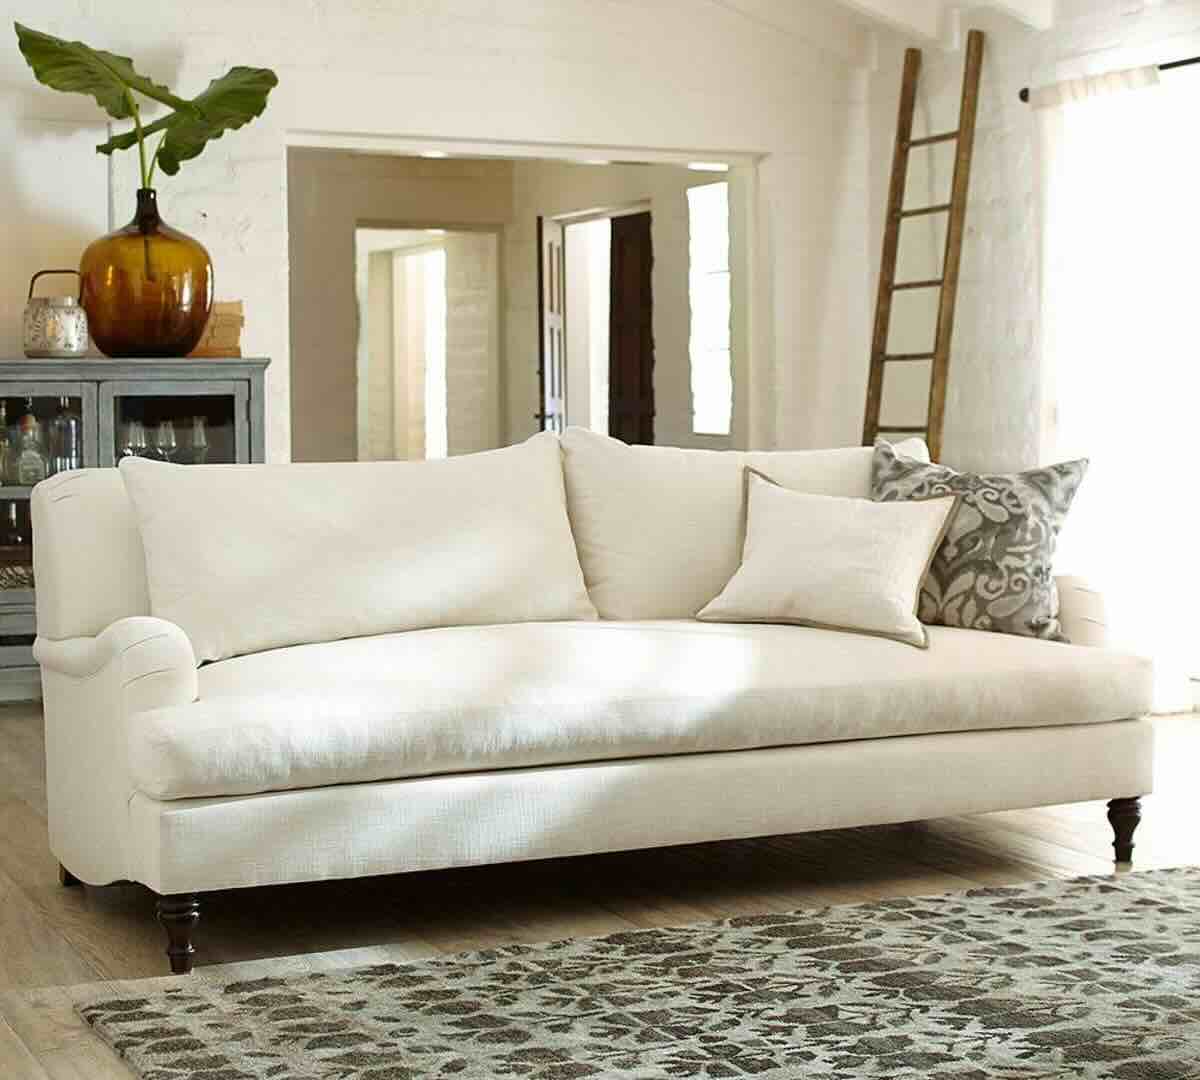 How To Style A Couch With Cushions